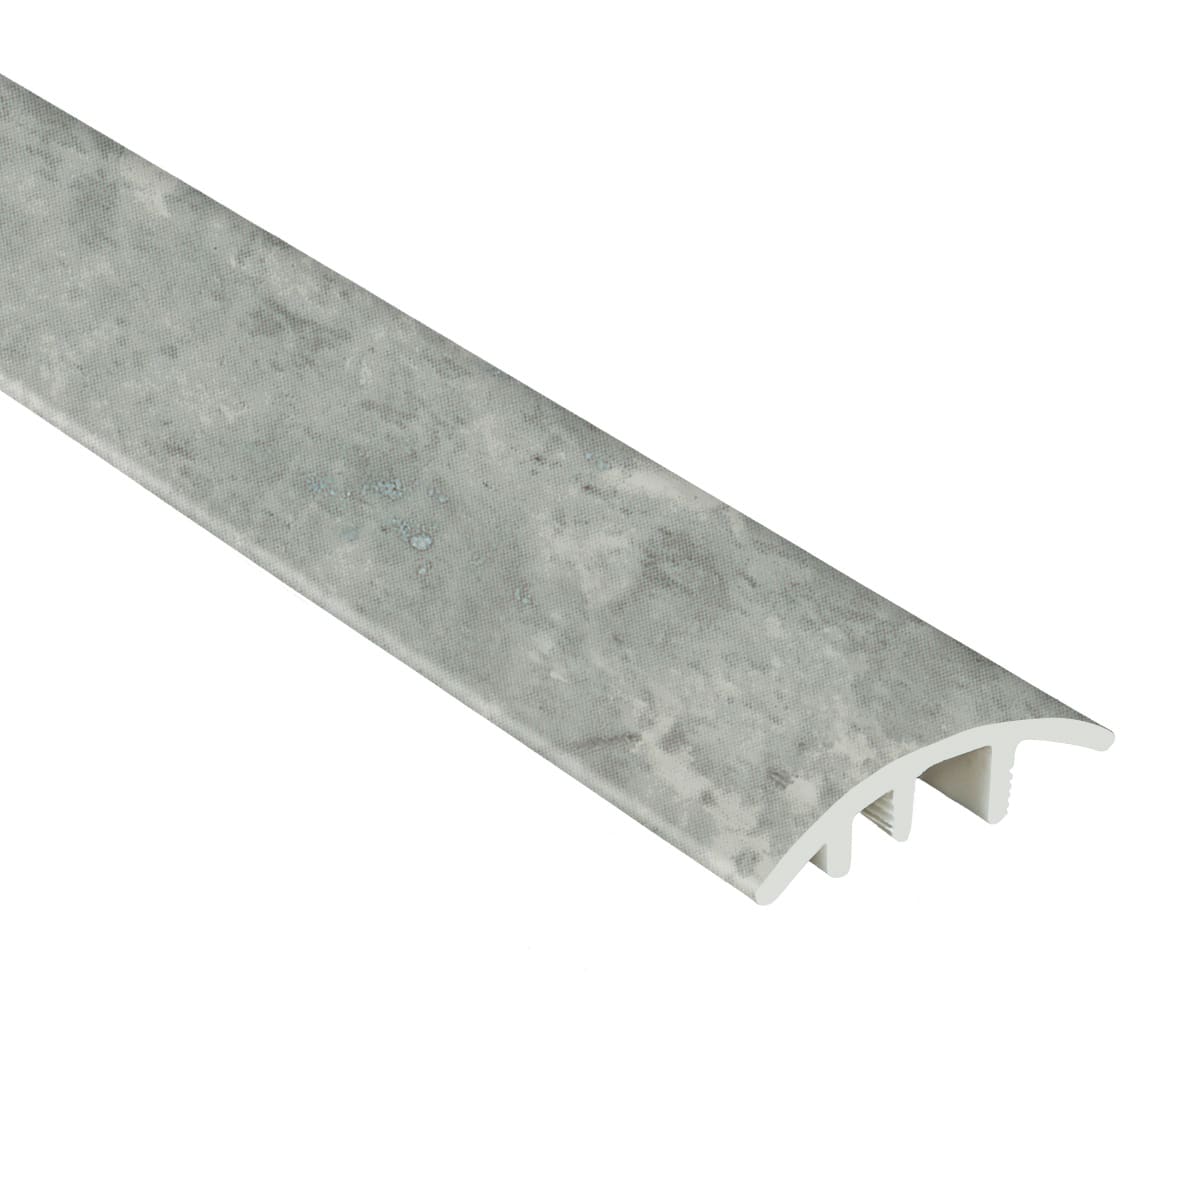 Pantheon Plaza Concrete Waterproof 1.89 in wide x 7.5 ft Length Reducer